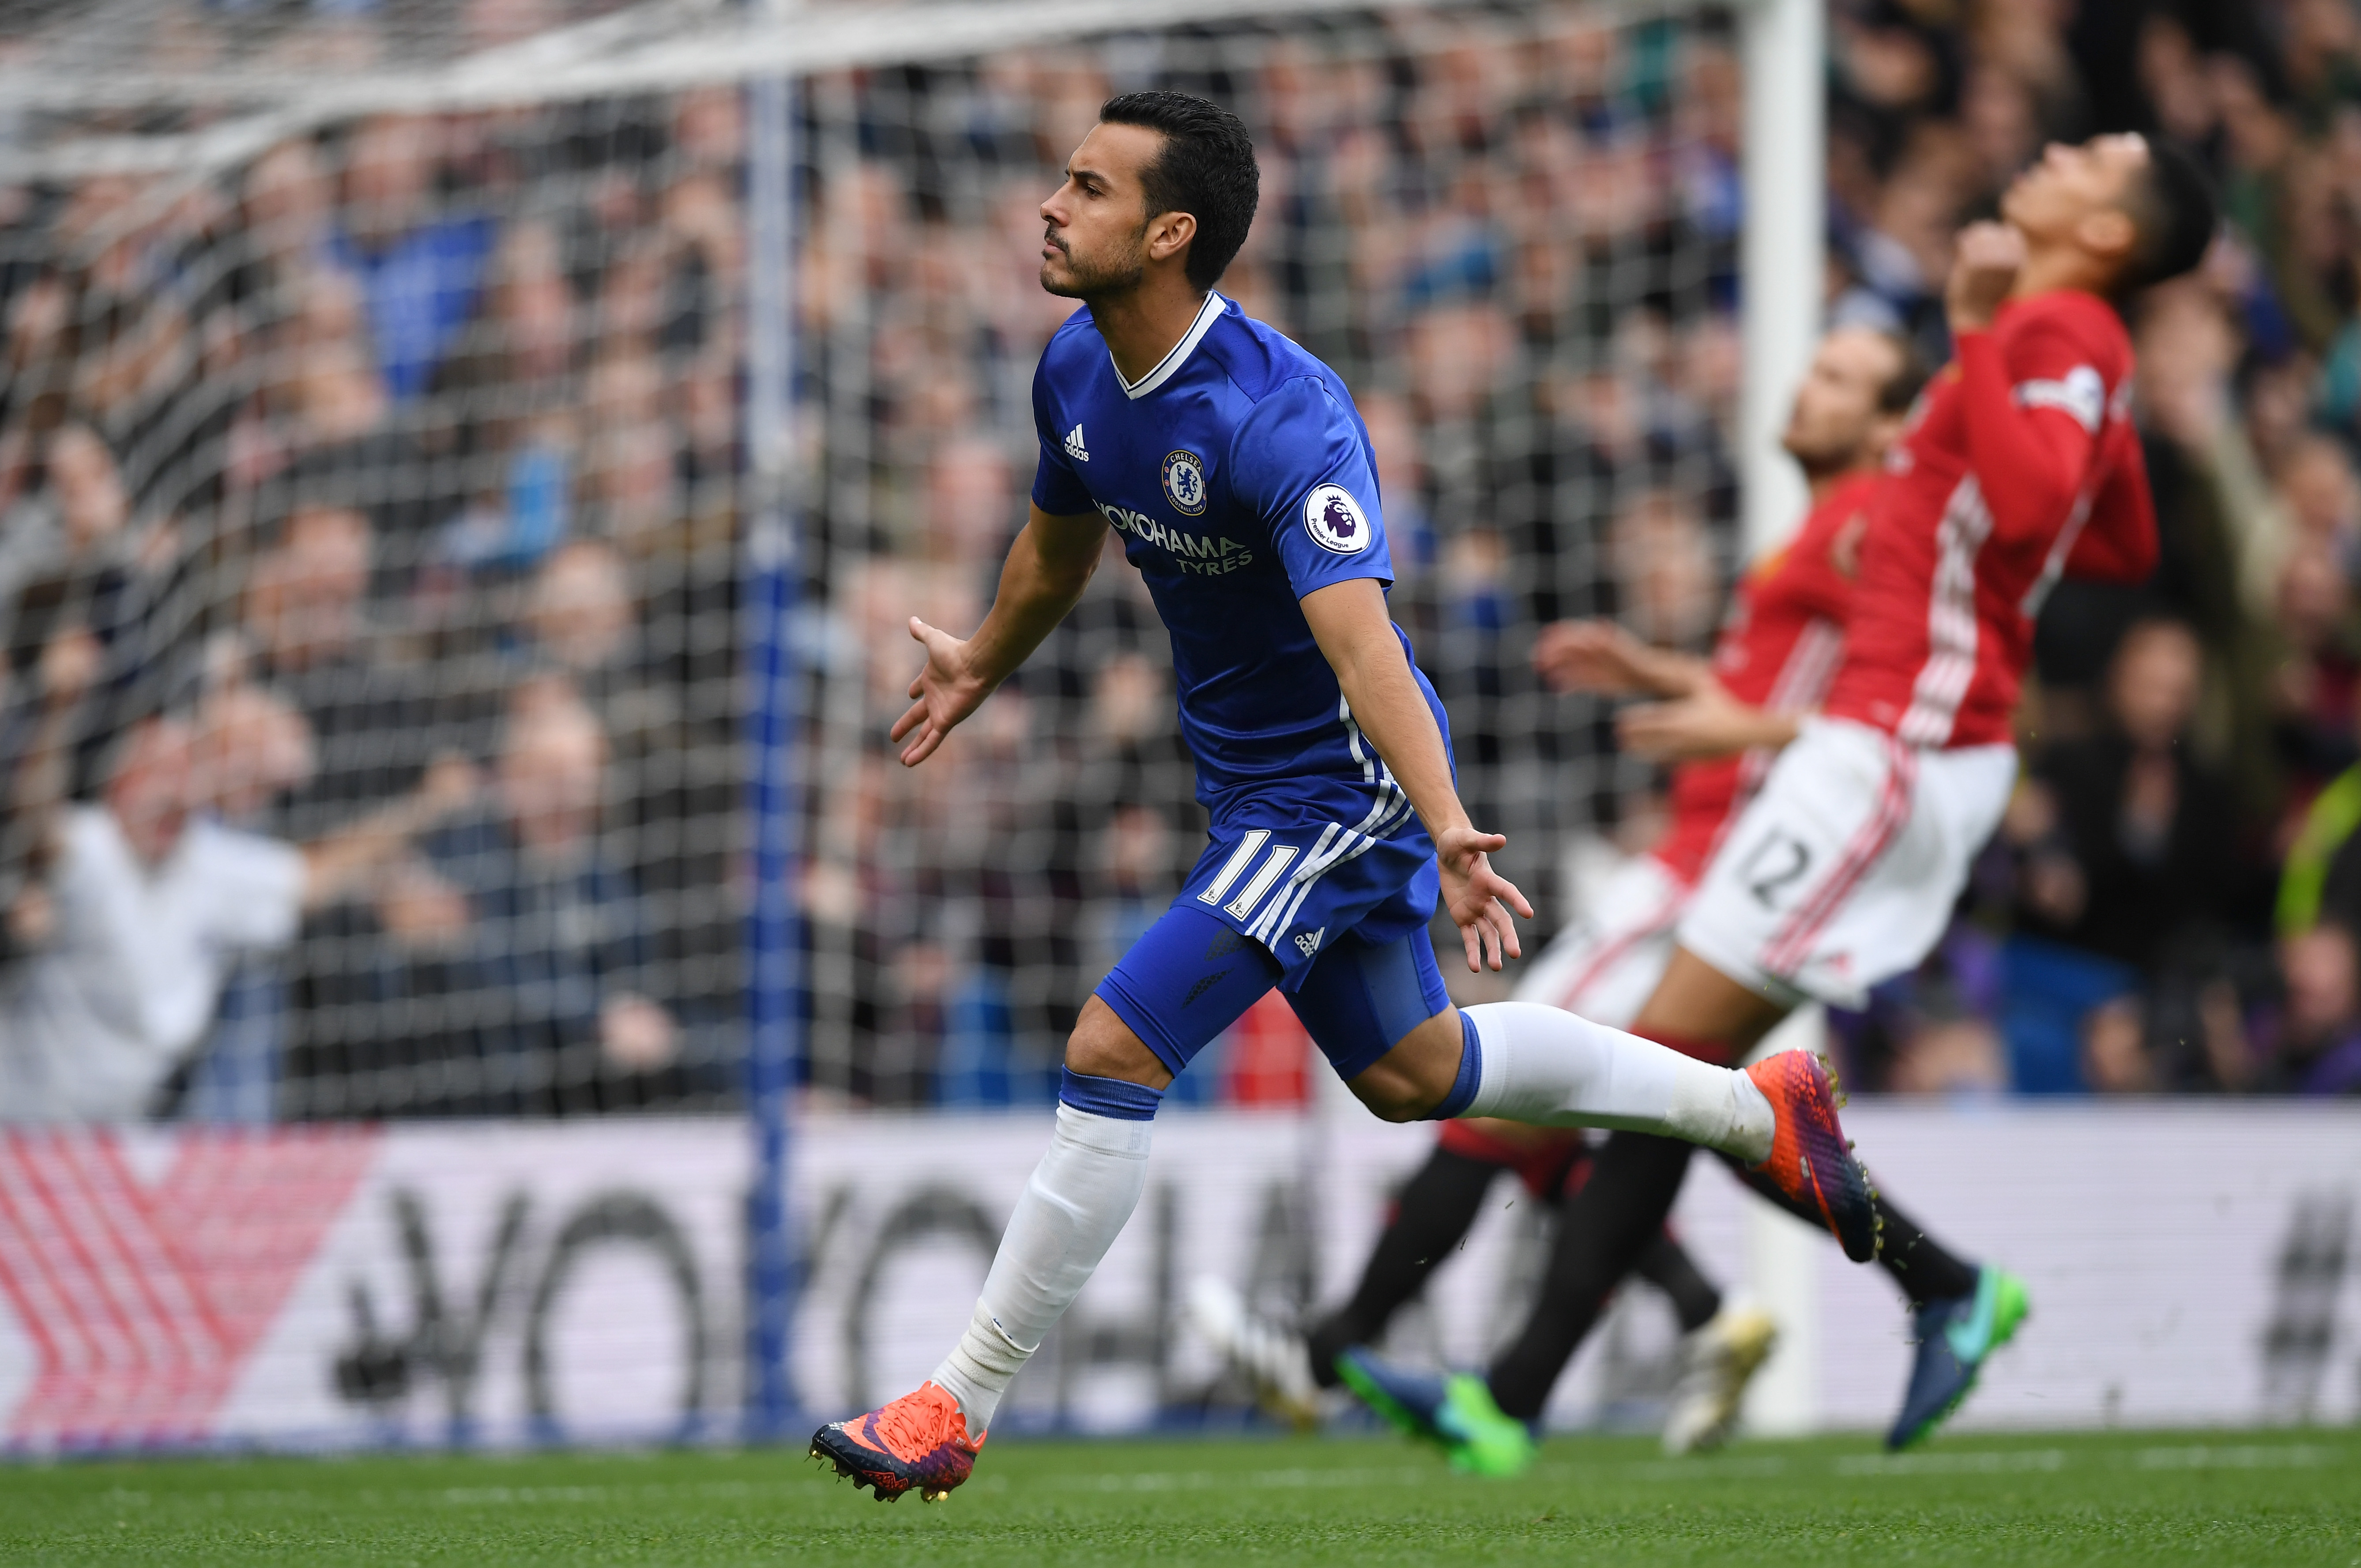 Chelsea 4-0 Manchester United | Player Ratings